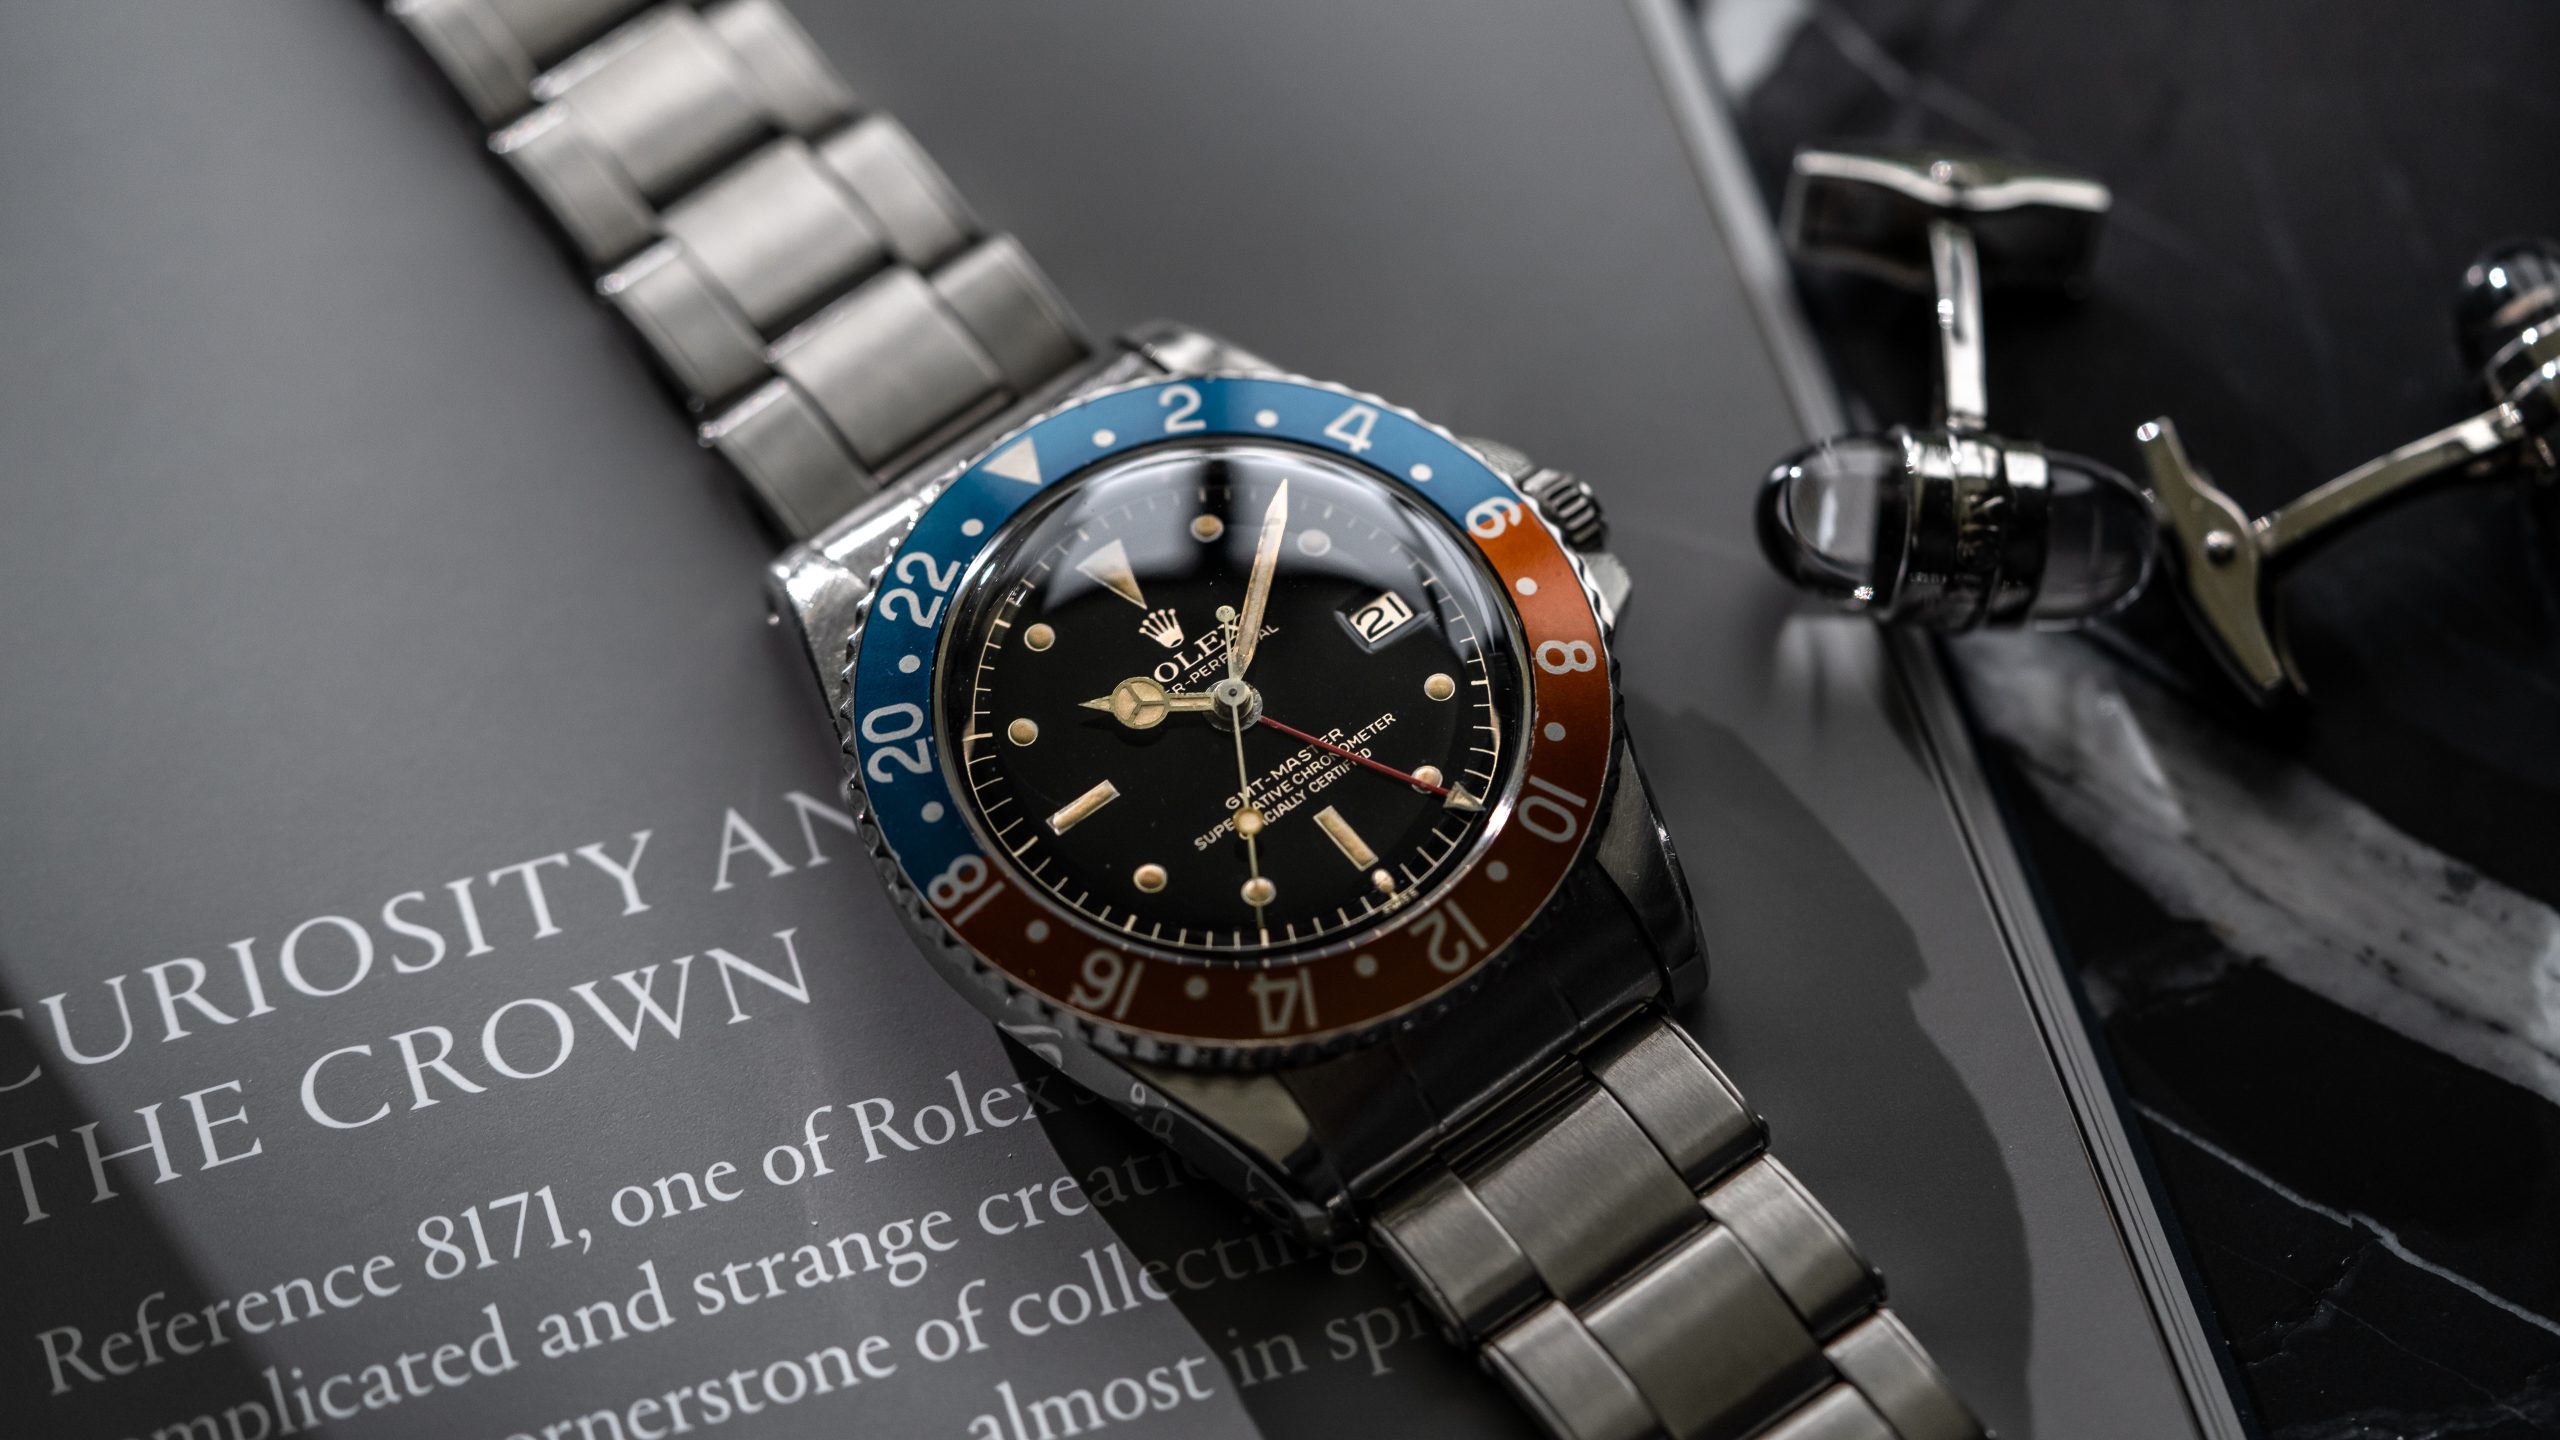 Rolex-1675-Gilt-Exclamation-Dial-GMT-Master